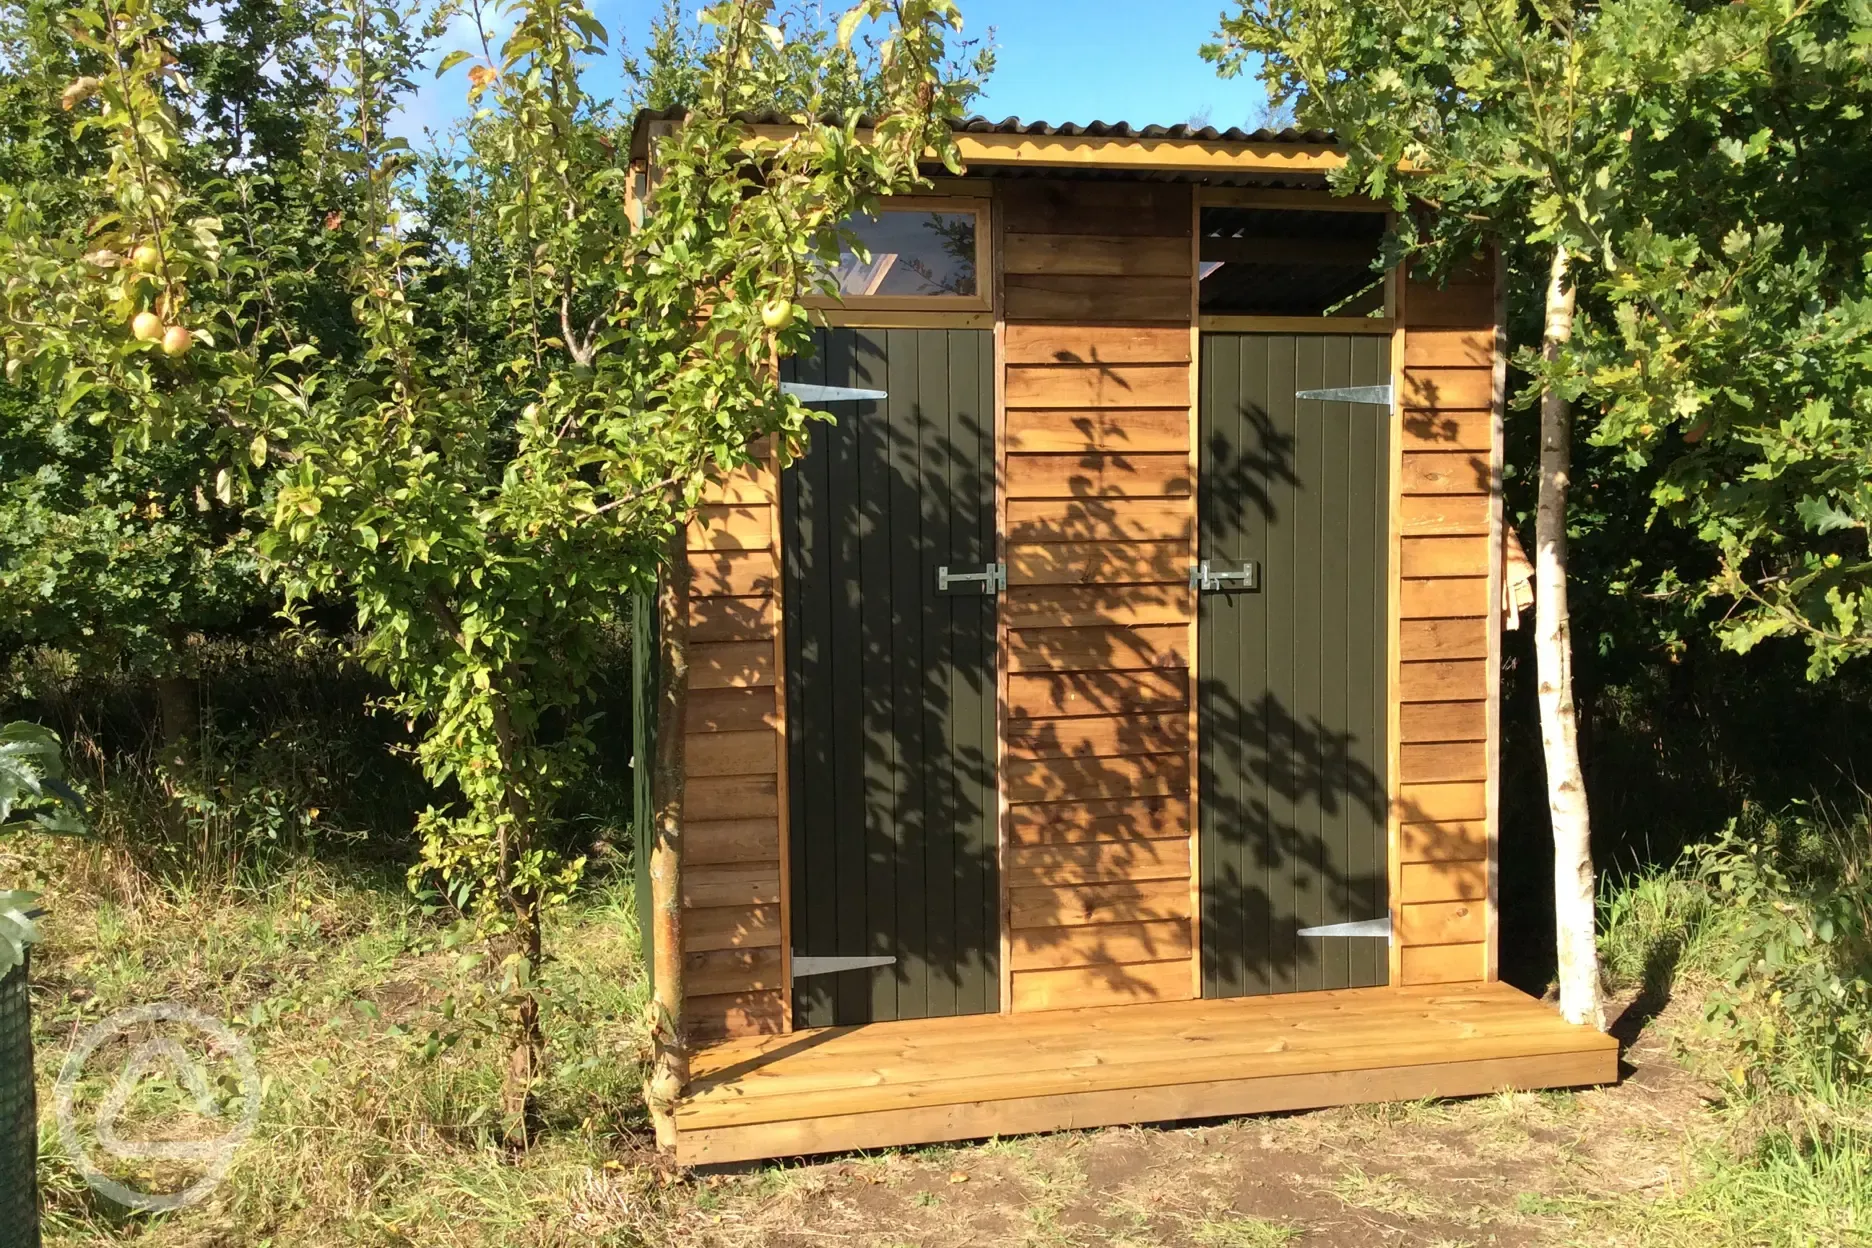 Toilet and shower cabin